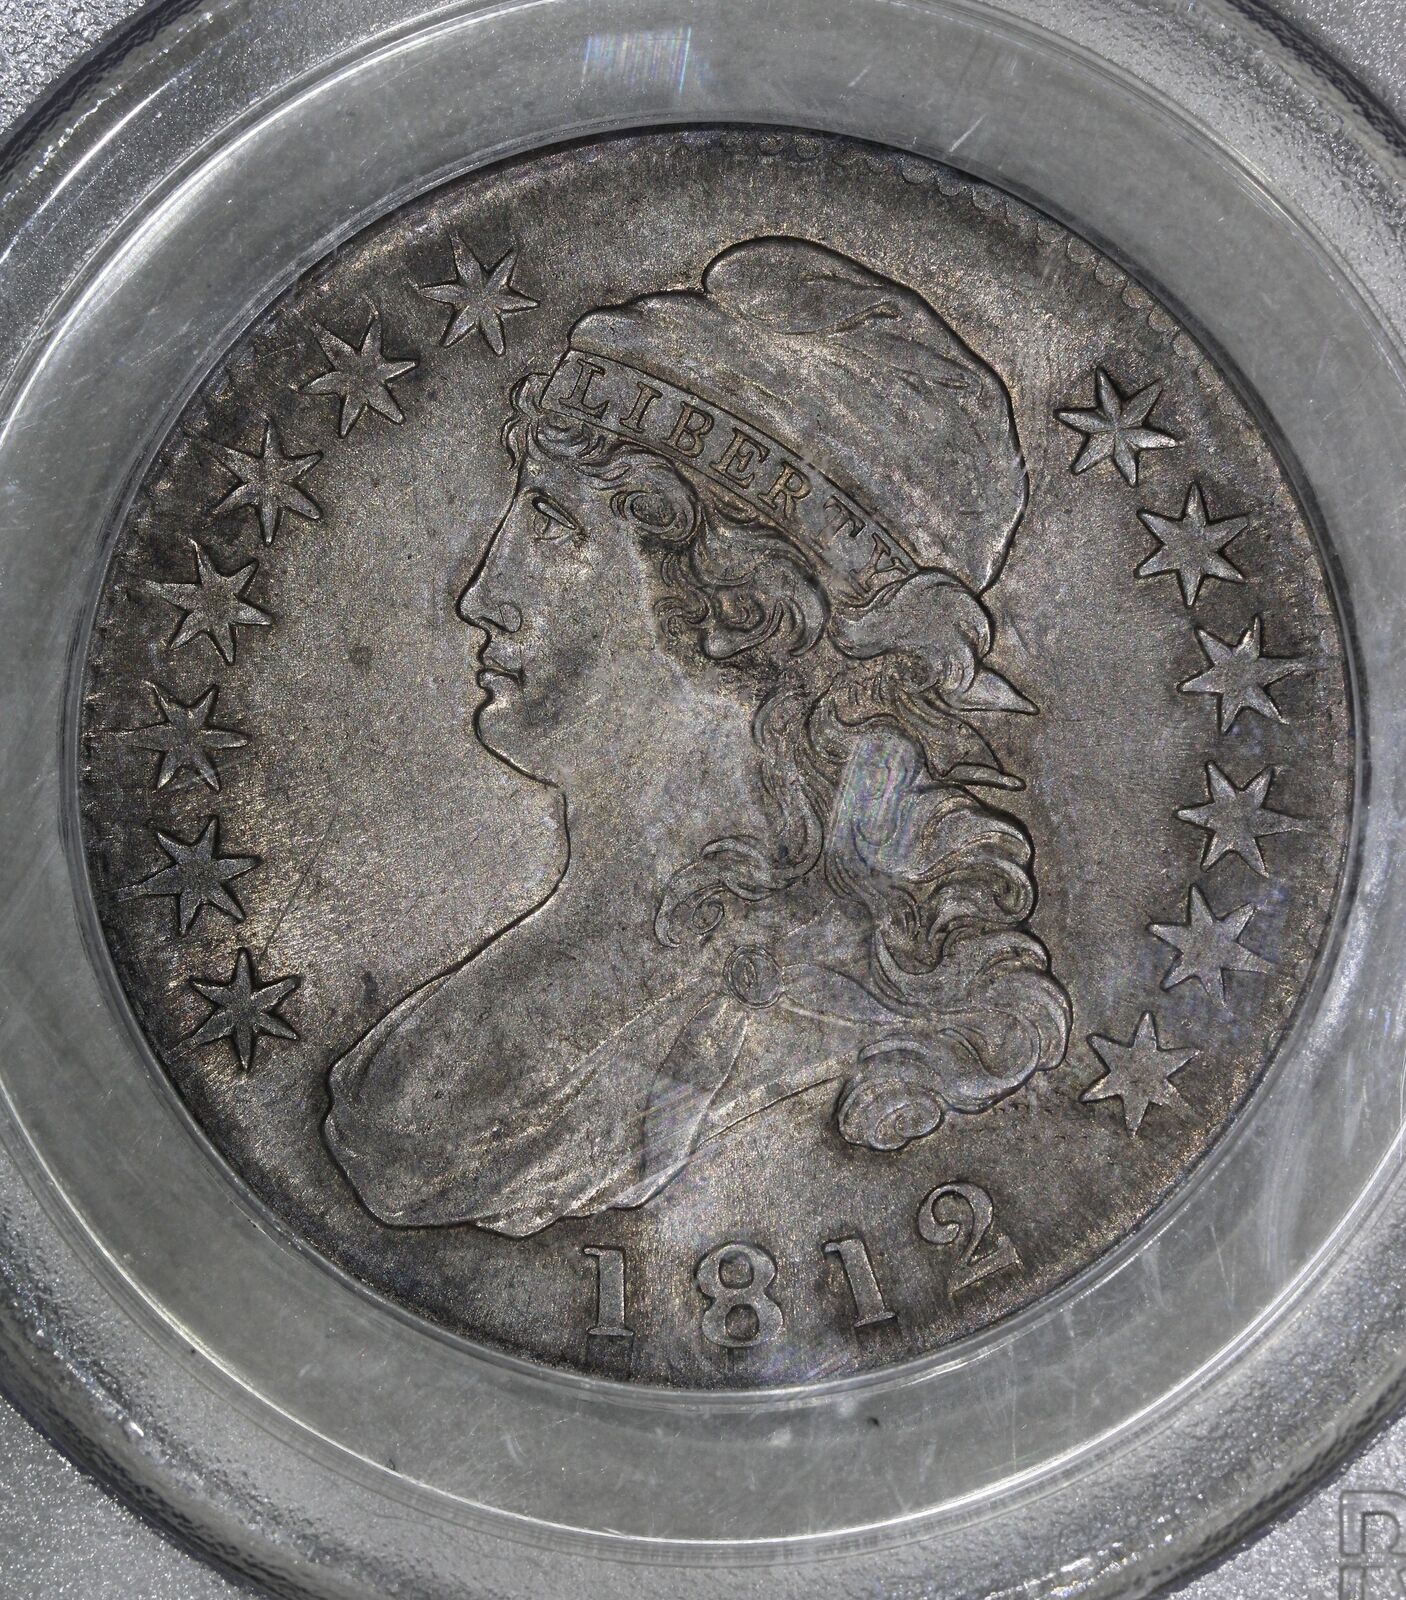 1812 (AU55 CAC) Capped Bust Half Dollar 50c PCGS Graded Coin